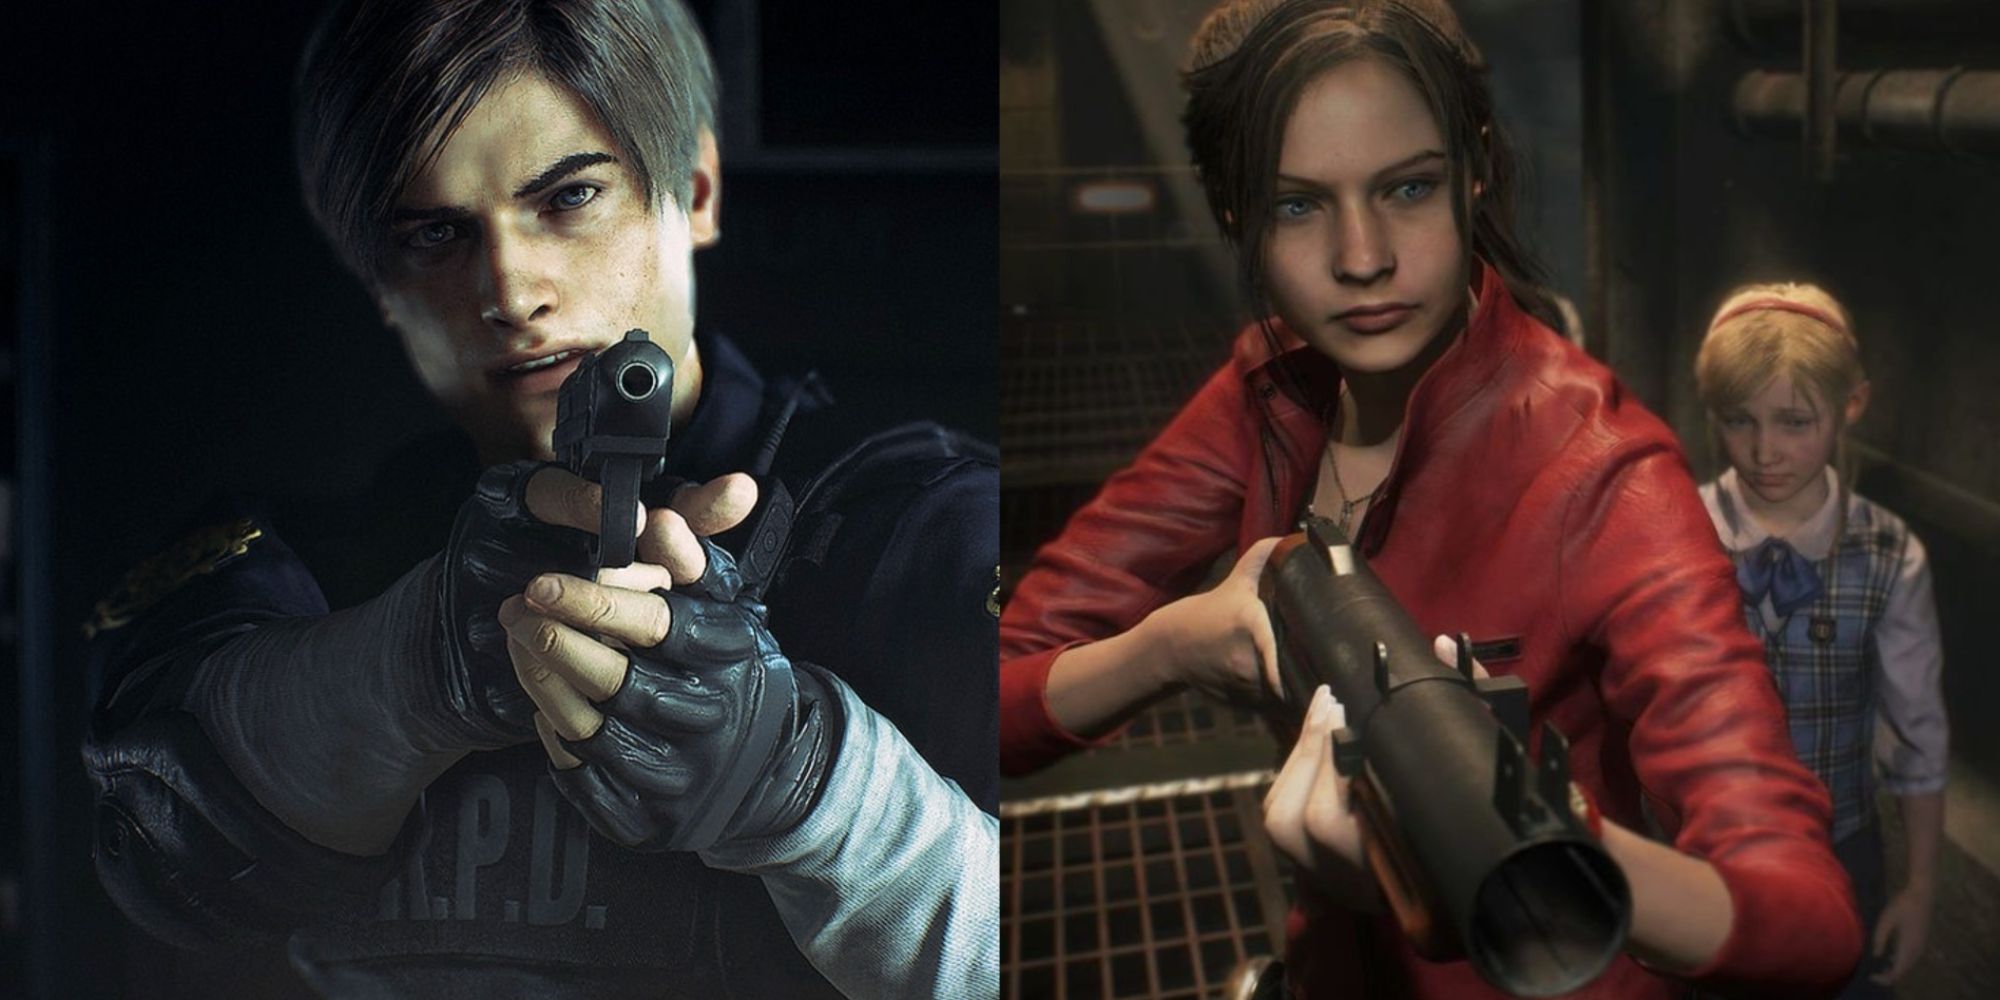 Resident Evil 2 Remake Which Scenario Is Canon Featured Split Image Leon And Claire